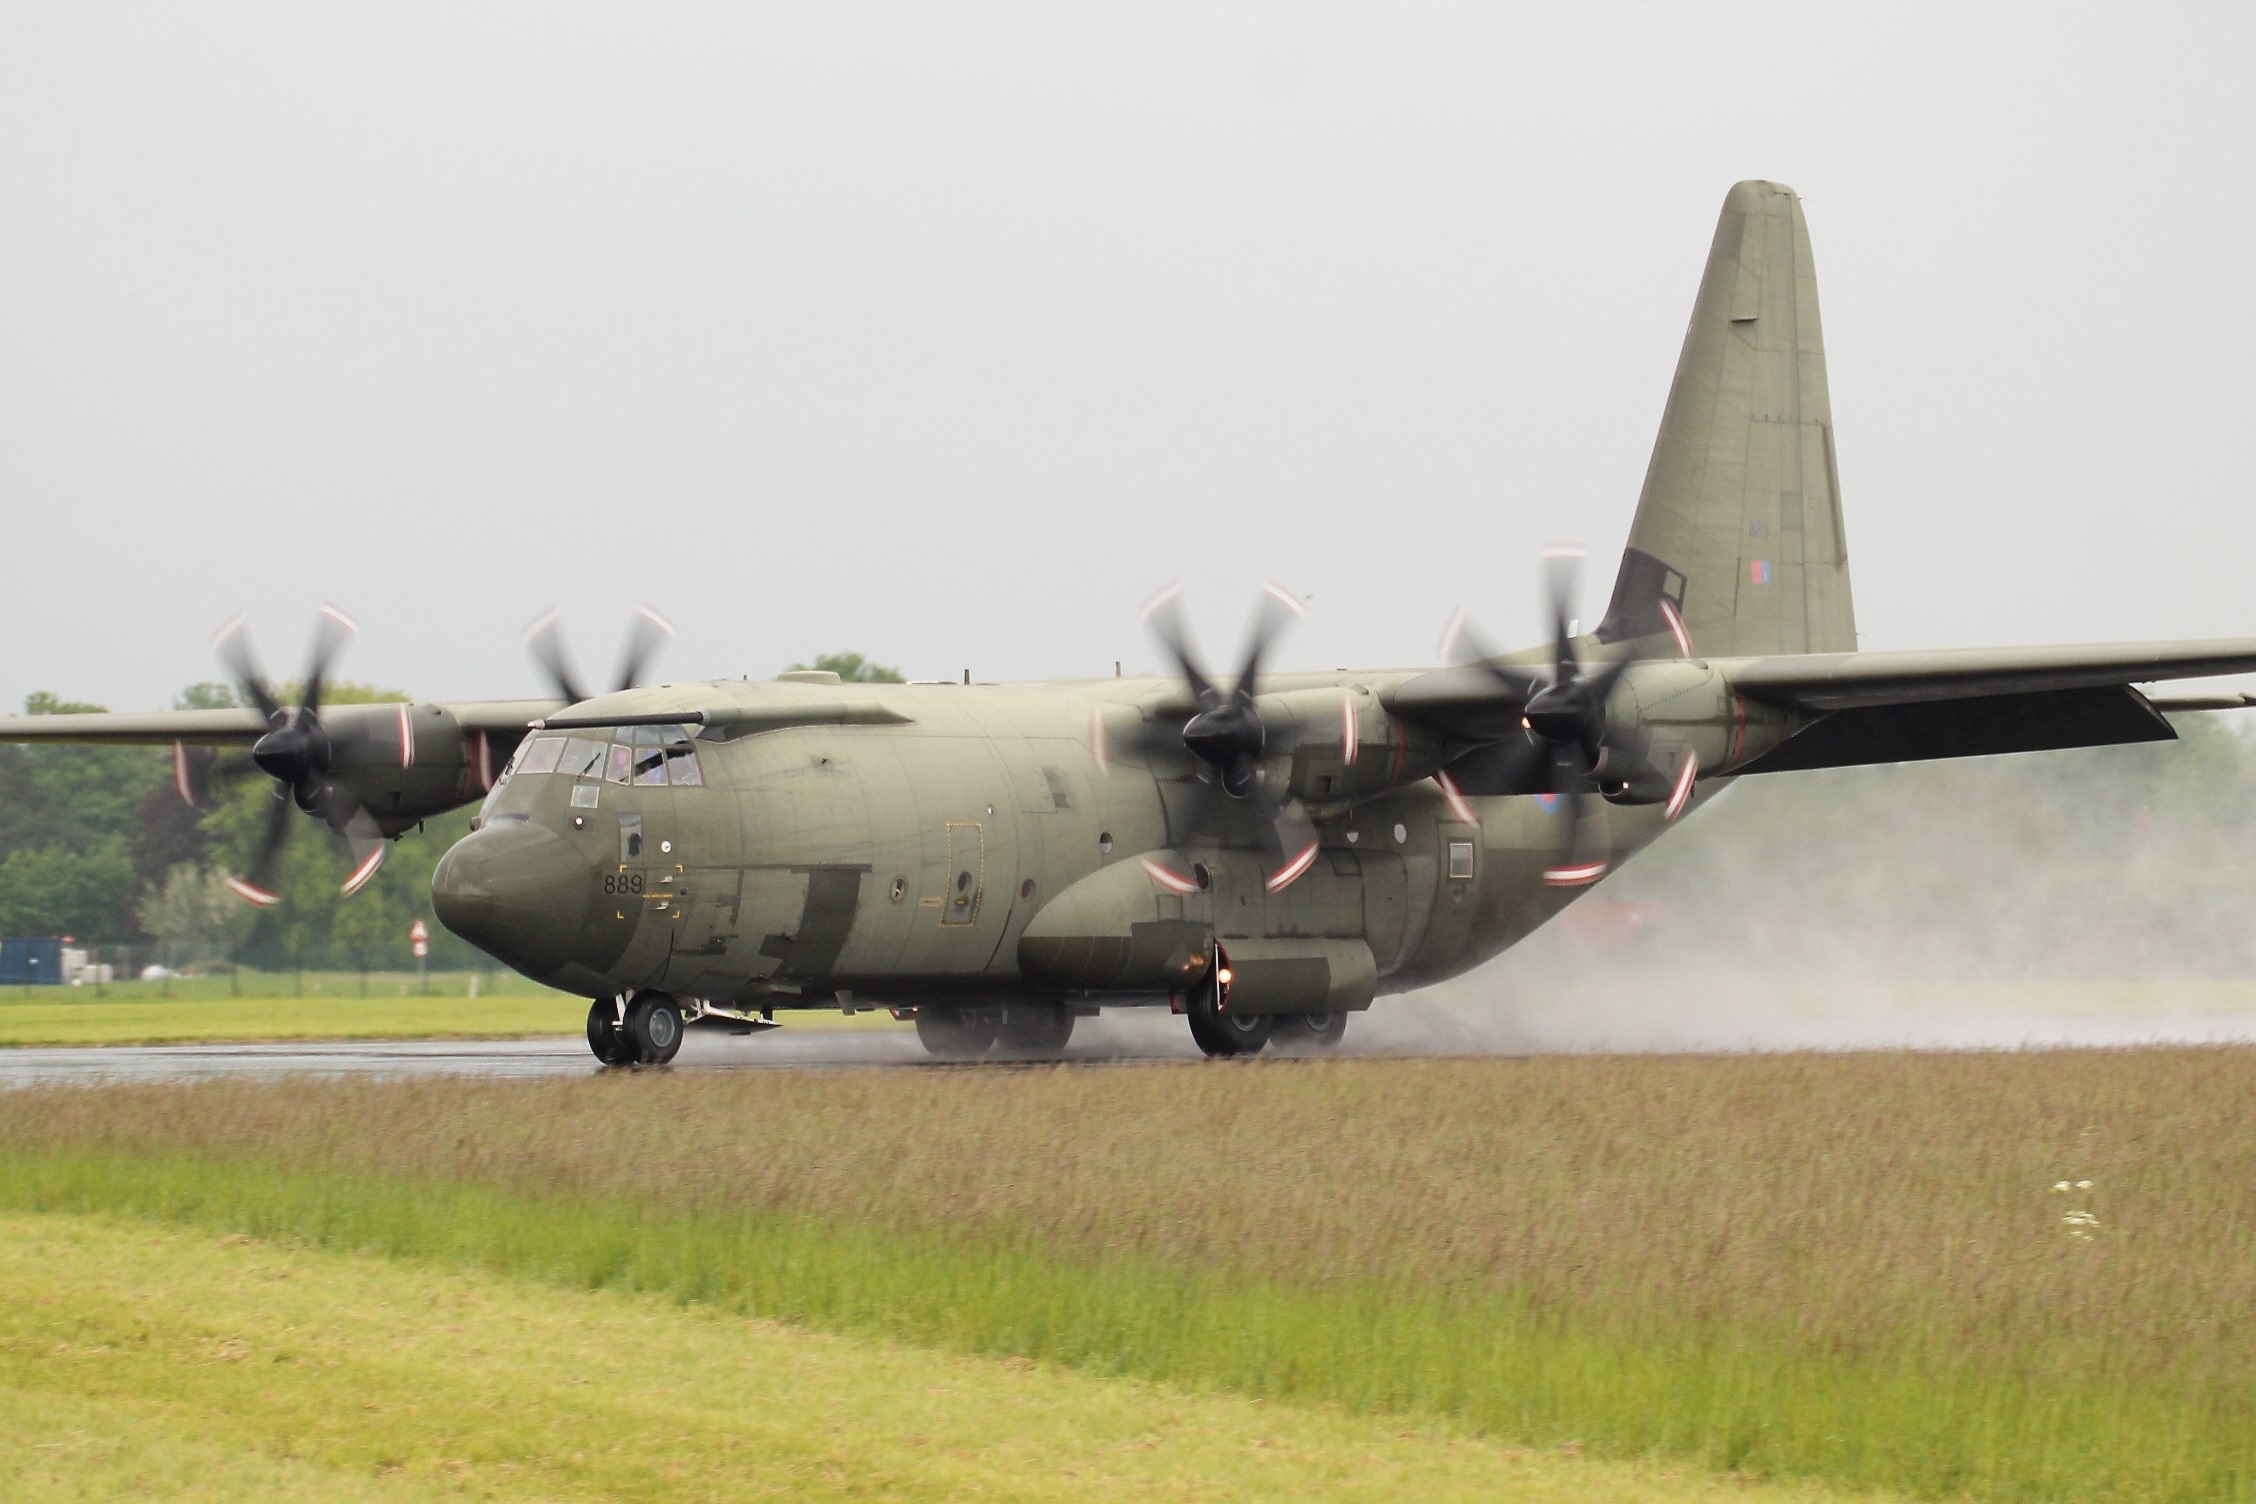 The RAF’s C-130J Hercules has made one of its final public appearances ahead of its retirement at the end of June.